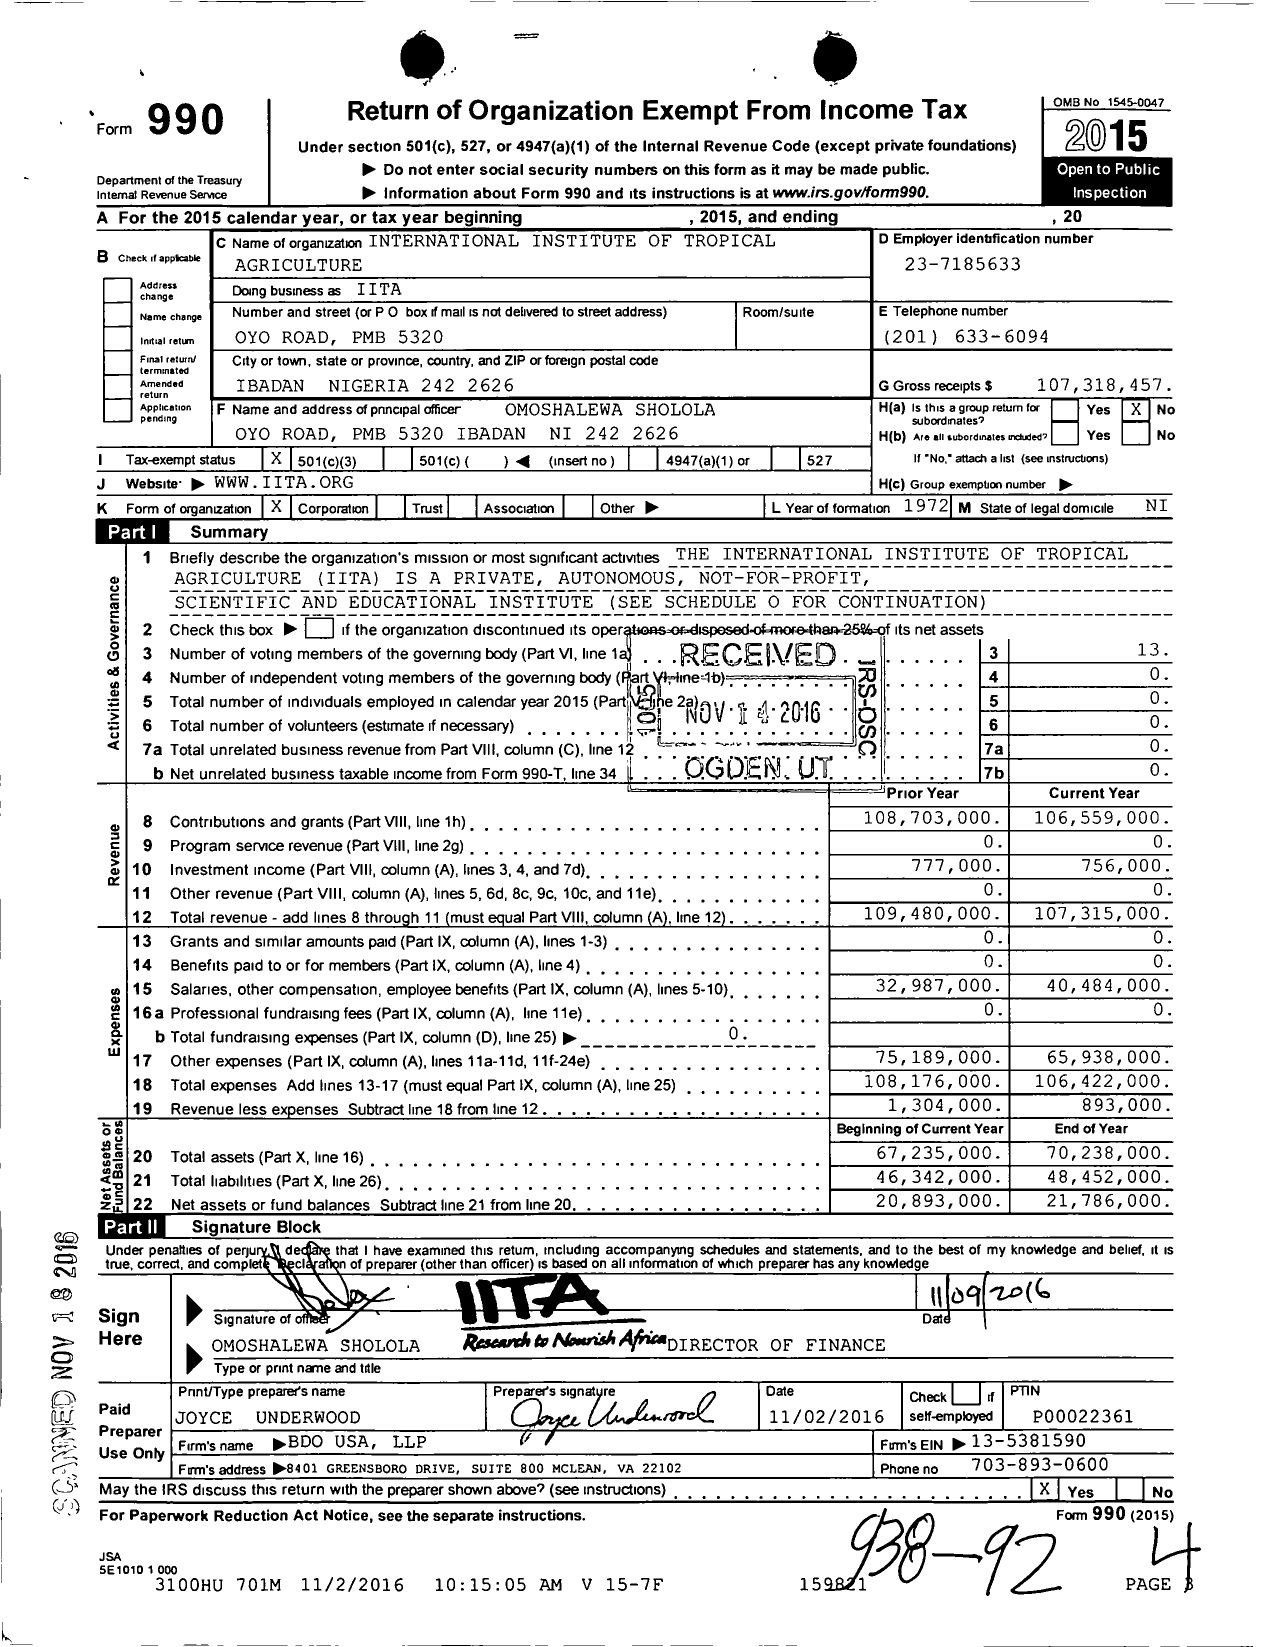 Image of first page of 2015 Form 990 for International Institute of Tropical Agriculture (IITA)